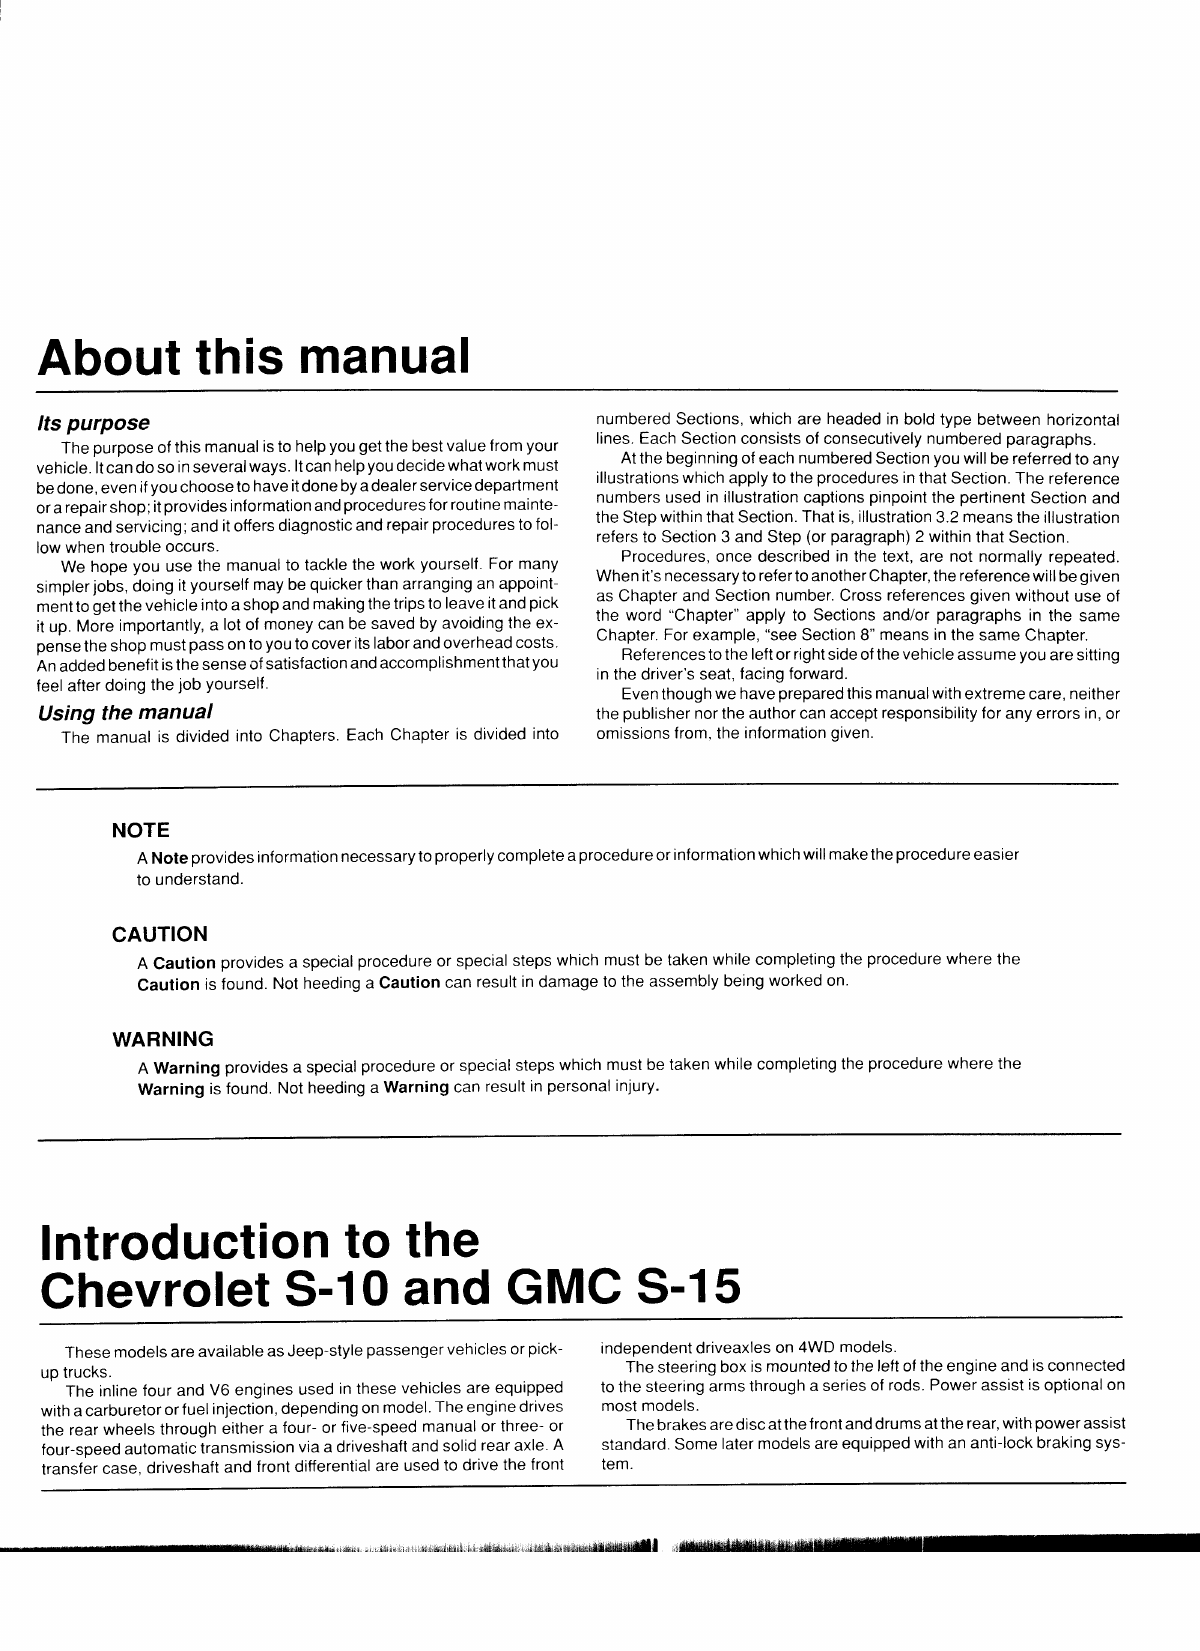 1982-1993 Chevrolet S10 Truck shop manual Preview image 3